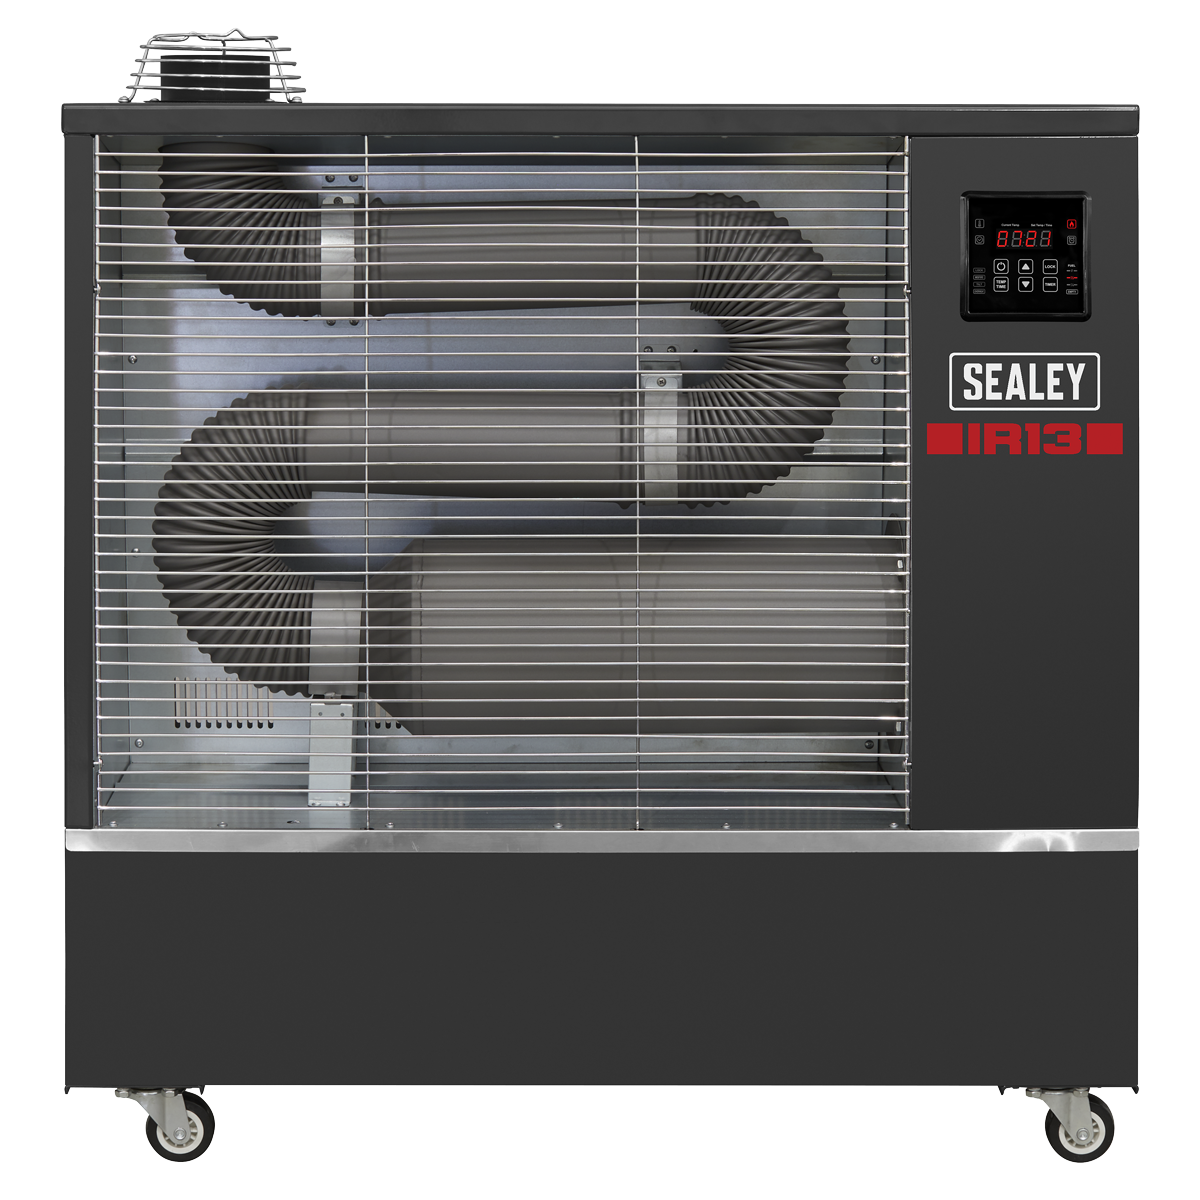 Sealey infrared heater that covers 11,477ft³(325m³) area